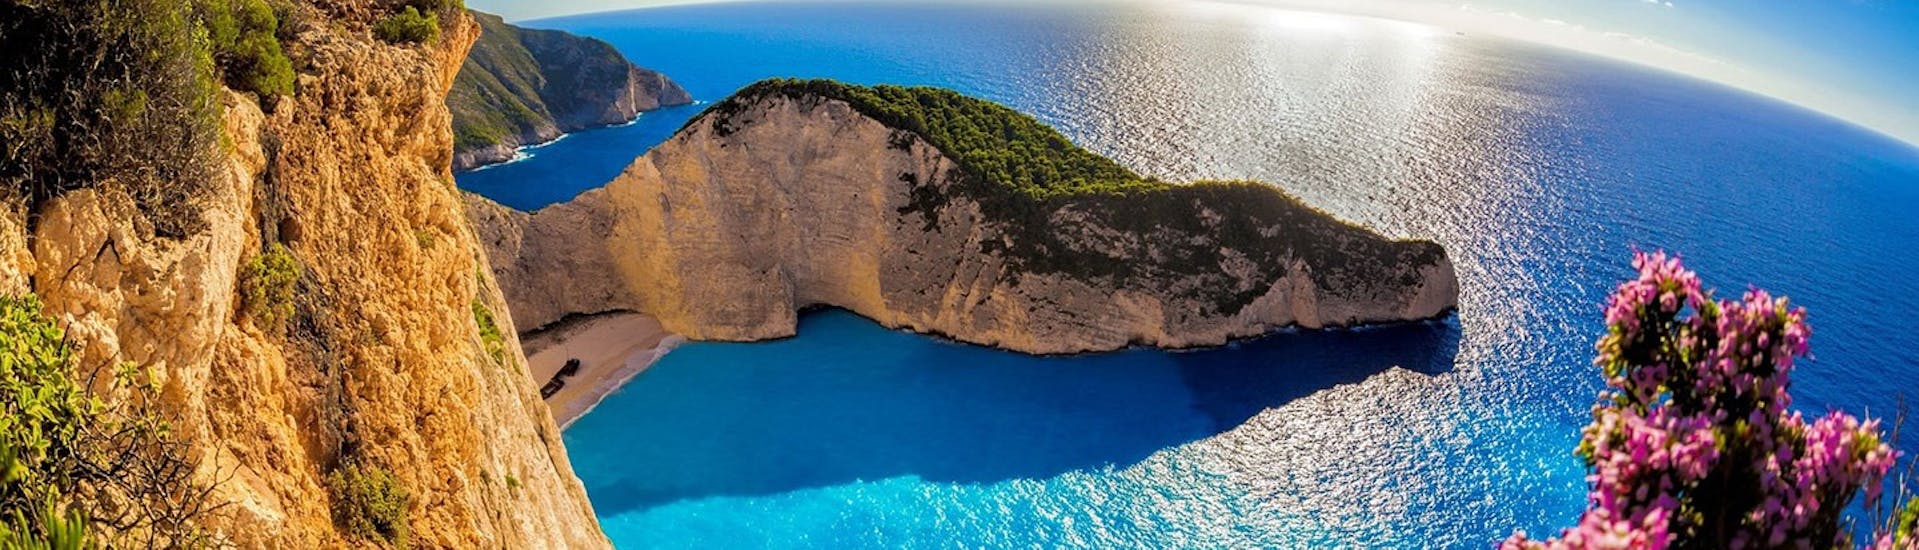 The view on the Shipwreck Beach from above during the Private 1 Day Boat & Car Trip from Zakynthos to Shipwreck Beach and the Blue Caves.